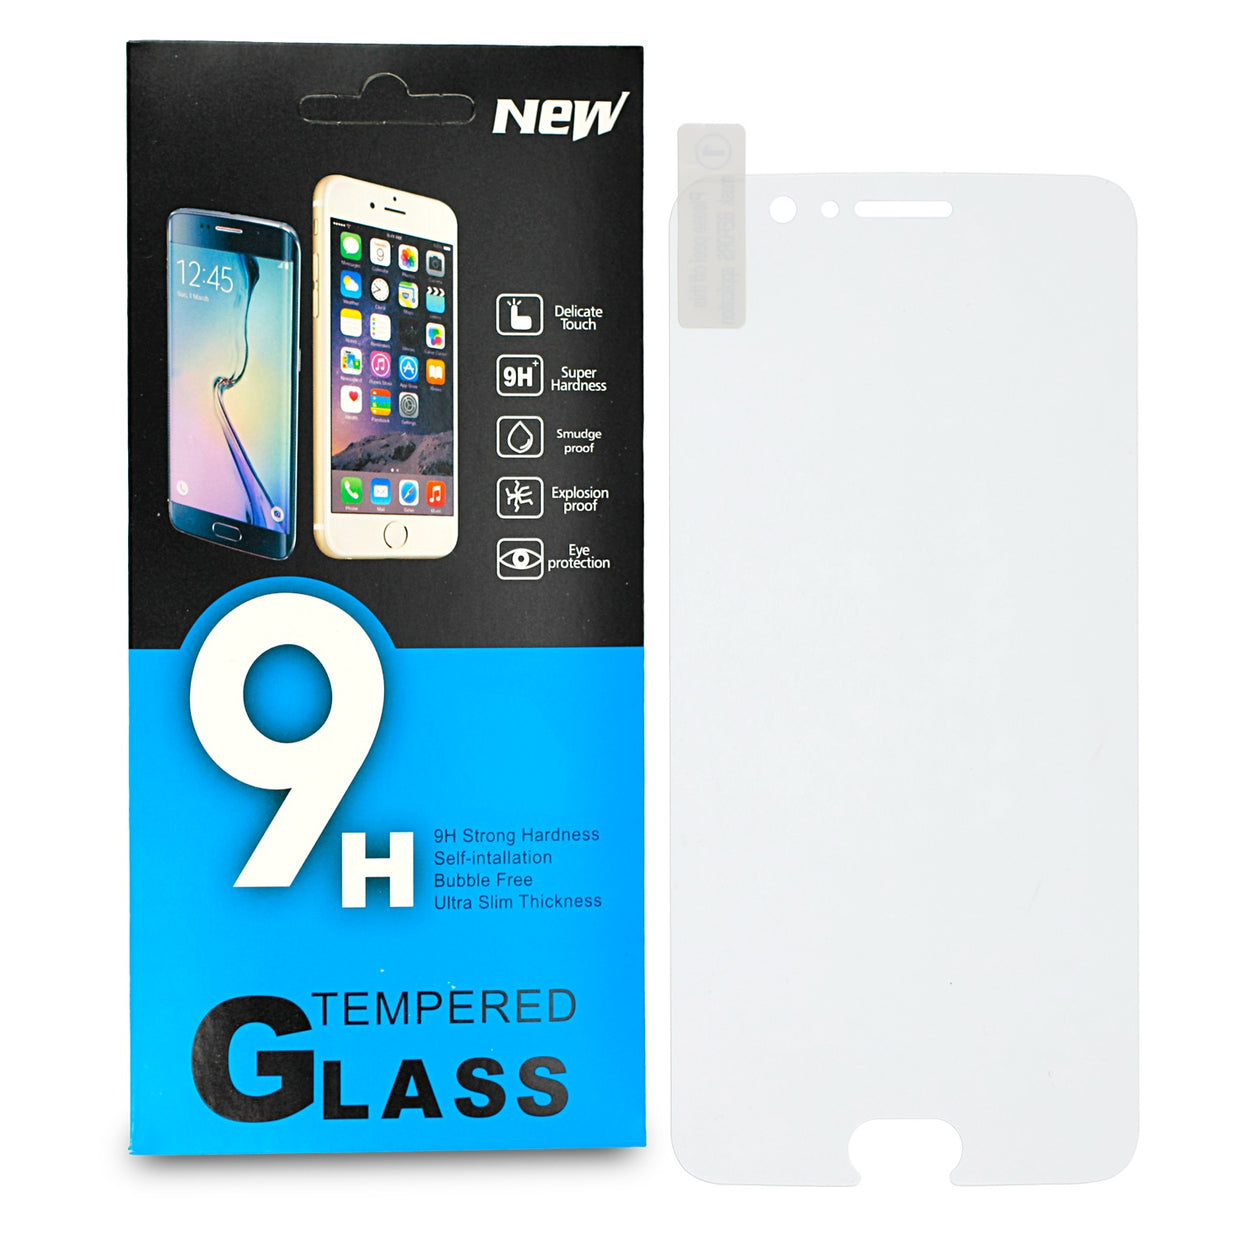 Top Glass for Samsung Galaxy A50 / A30 / A20 Pack of 10 pieces